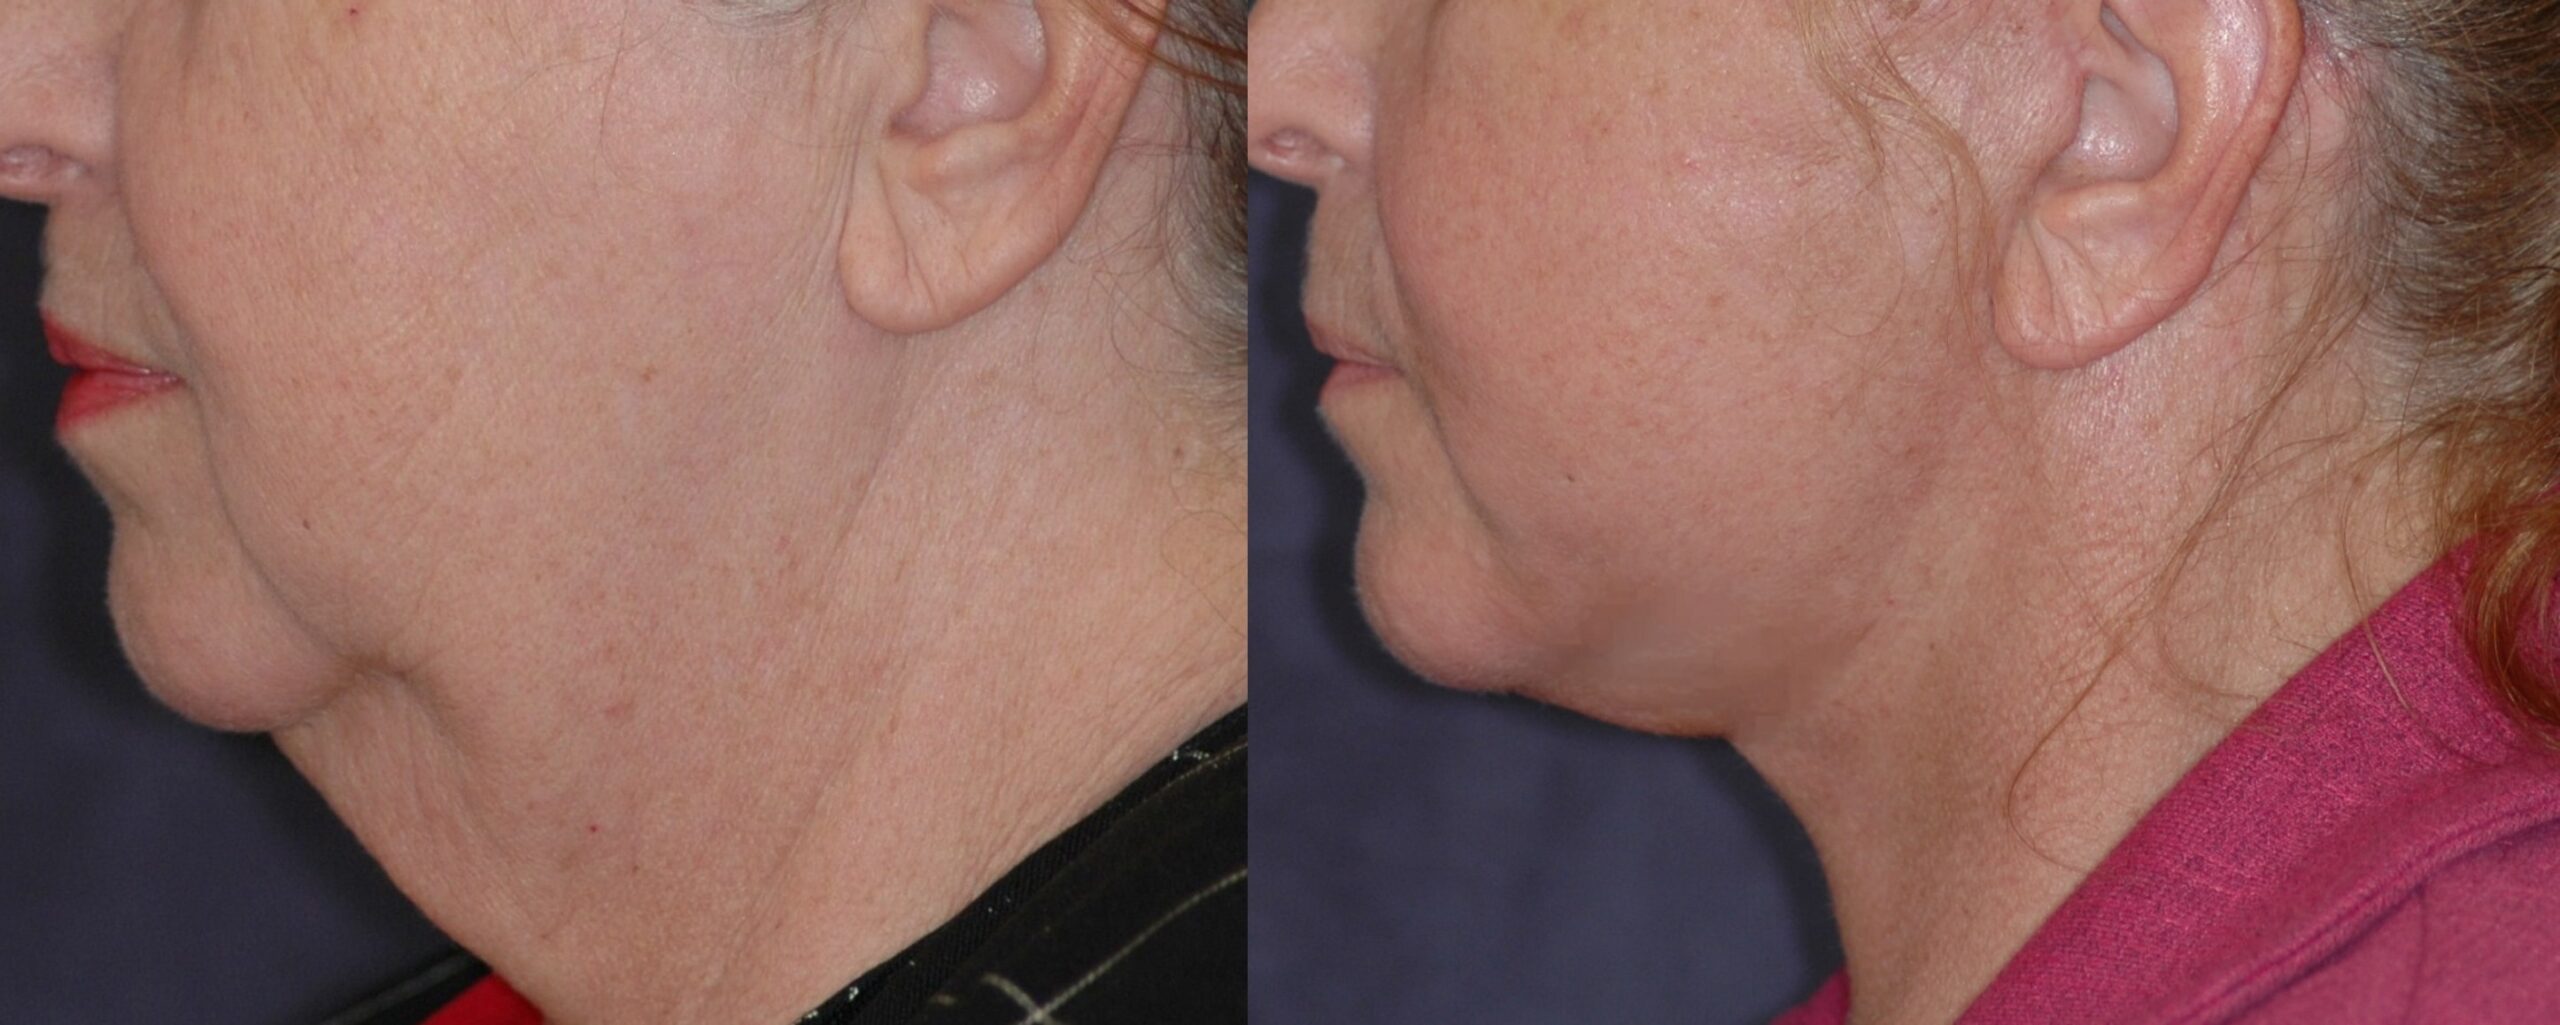 Lower Facelift - Before and after